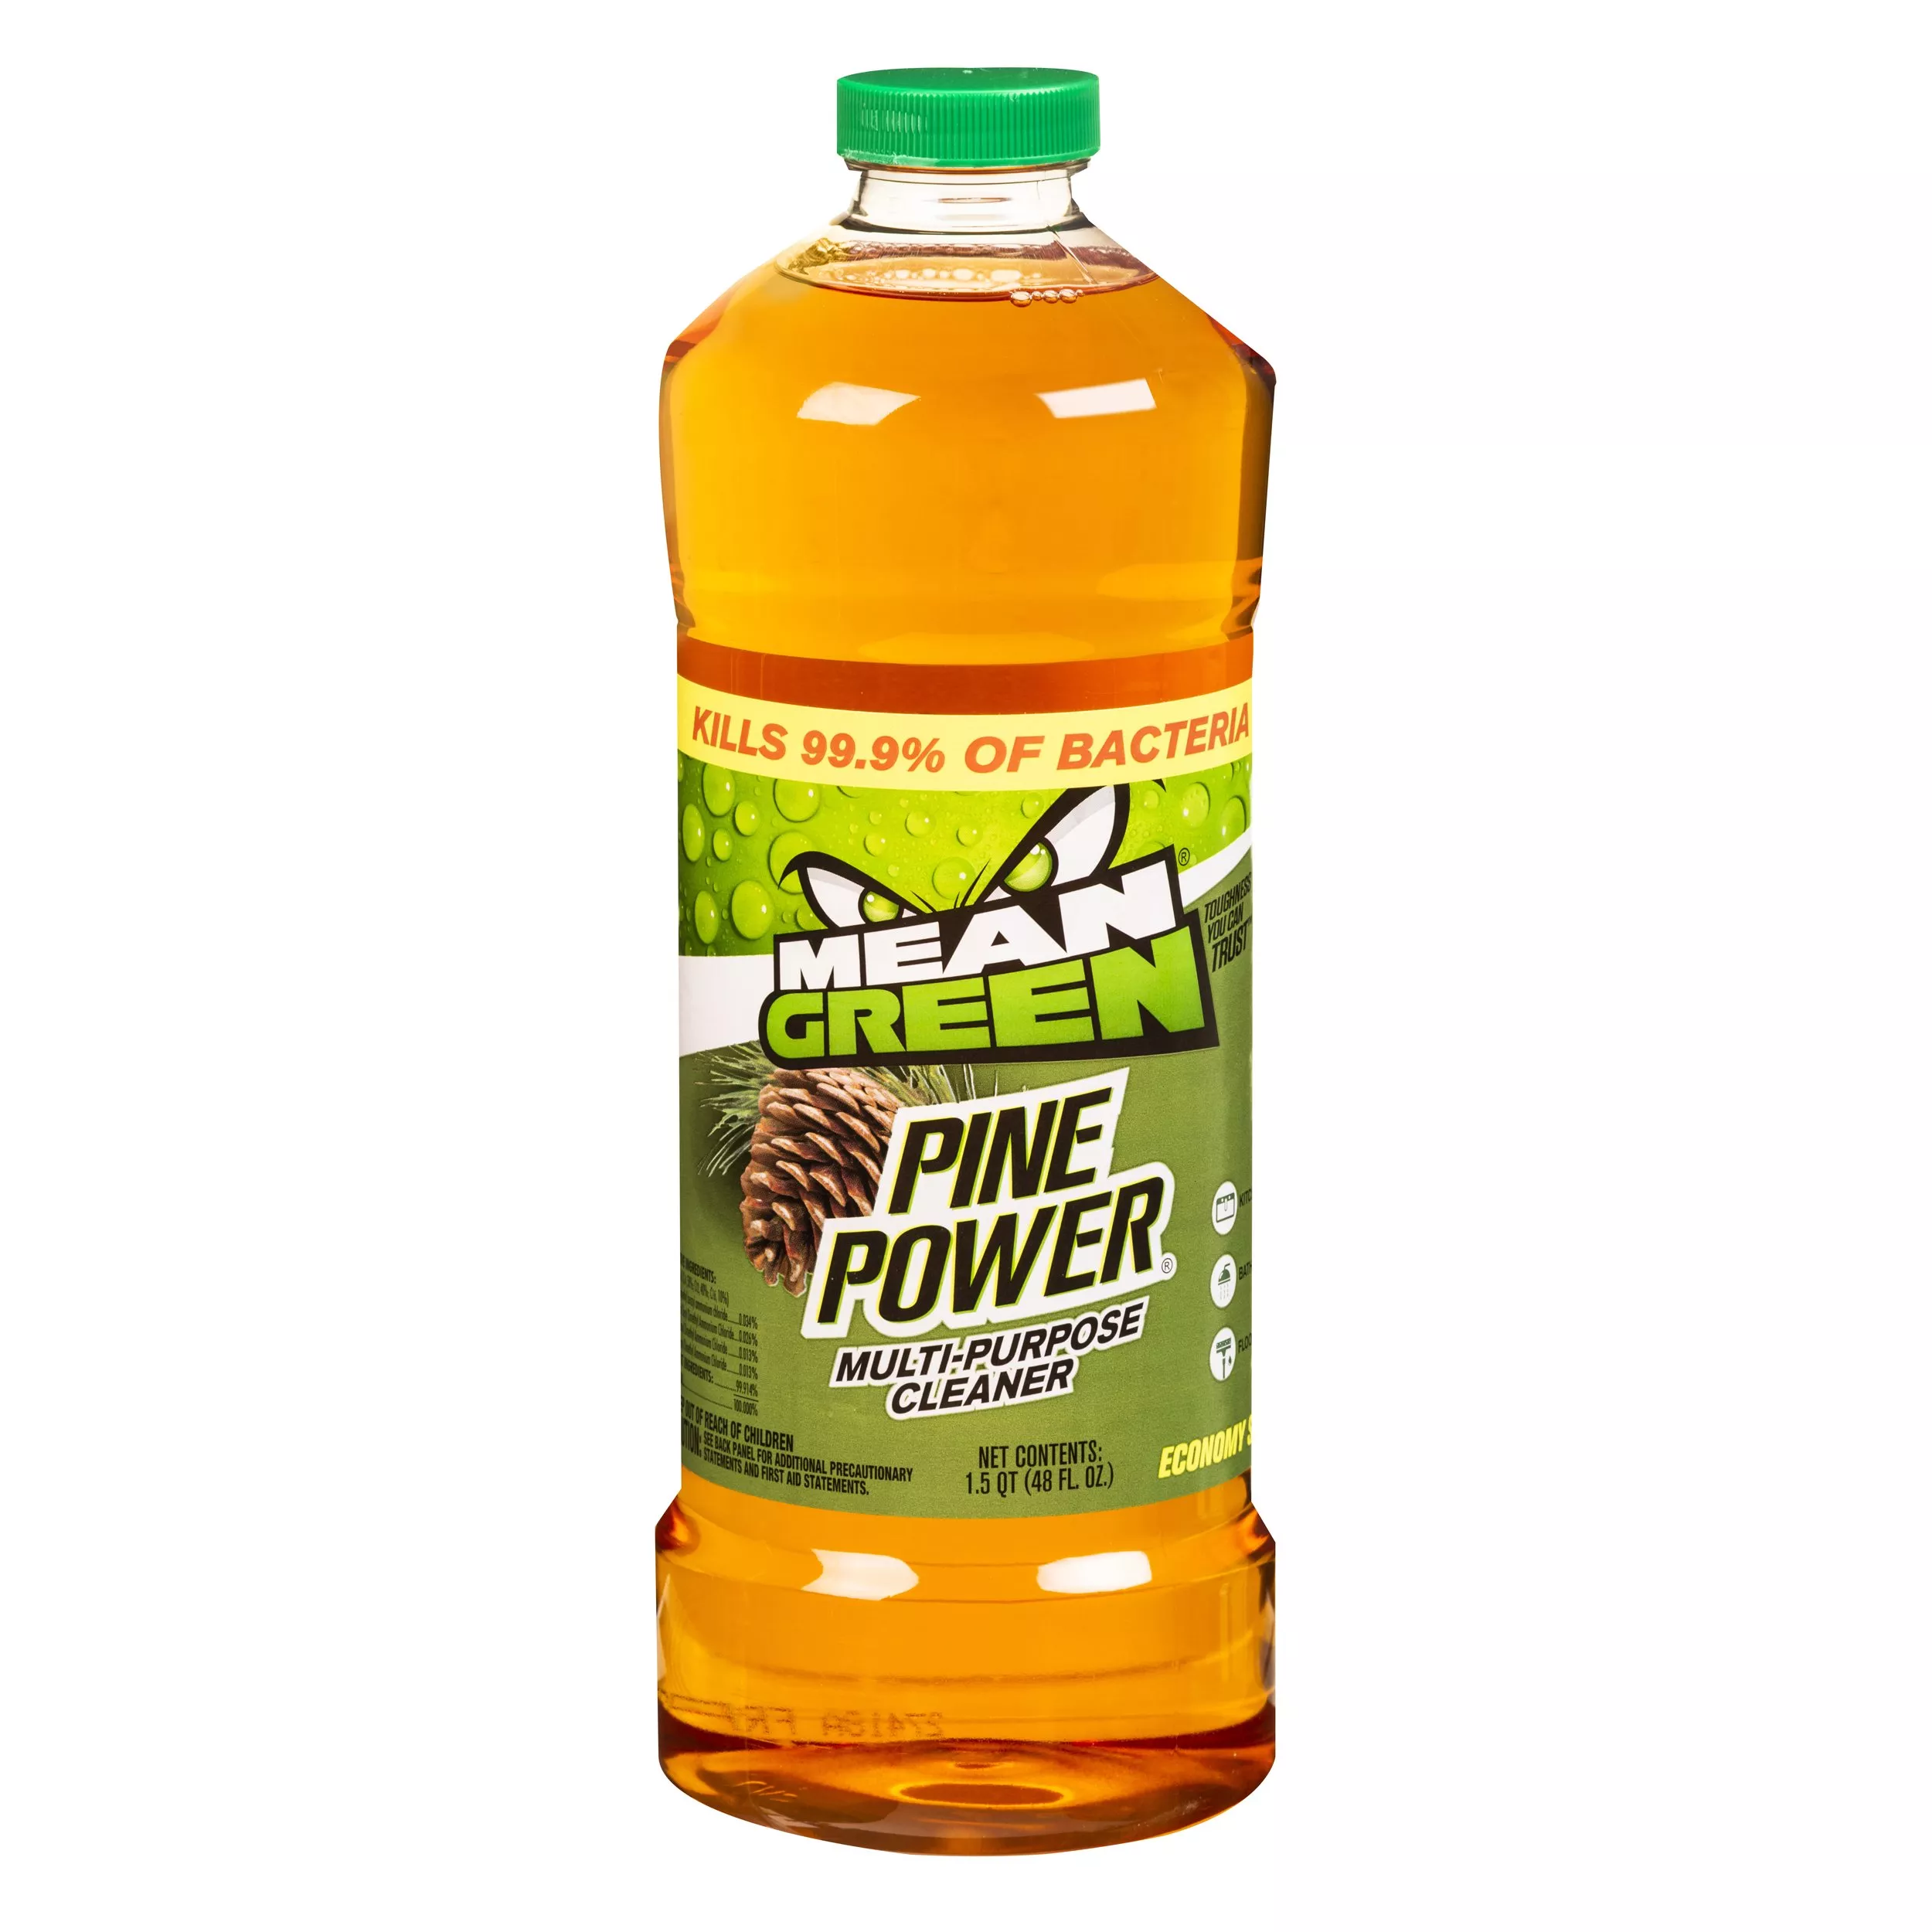 Mean Green Pine Power Disinfectant Multi-Purpose Cleaner 48oz.